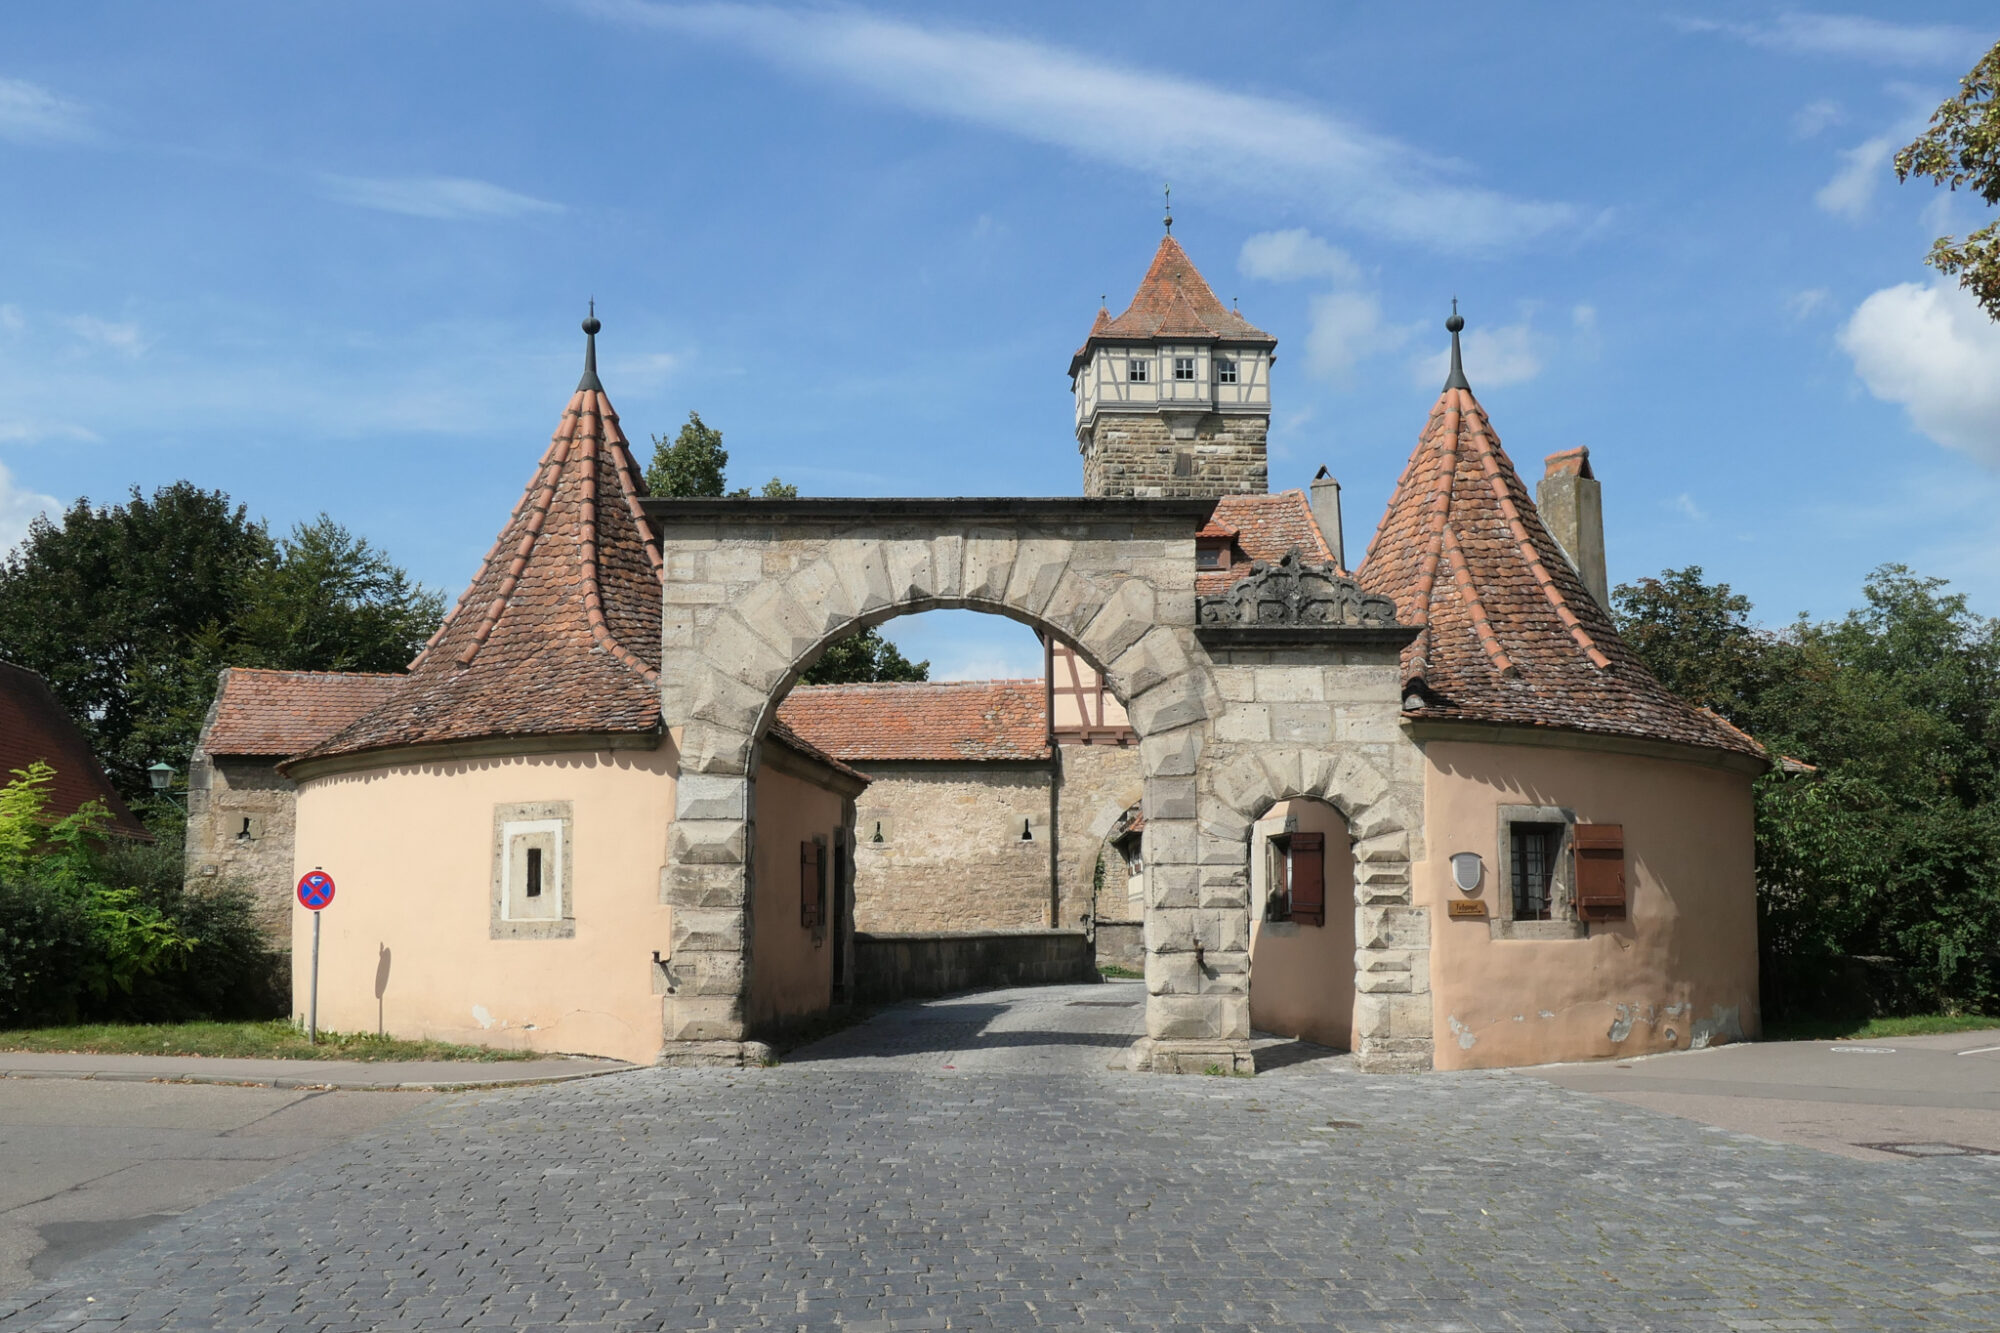 One of Rothenburg's city gates with Röderturm in the background.